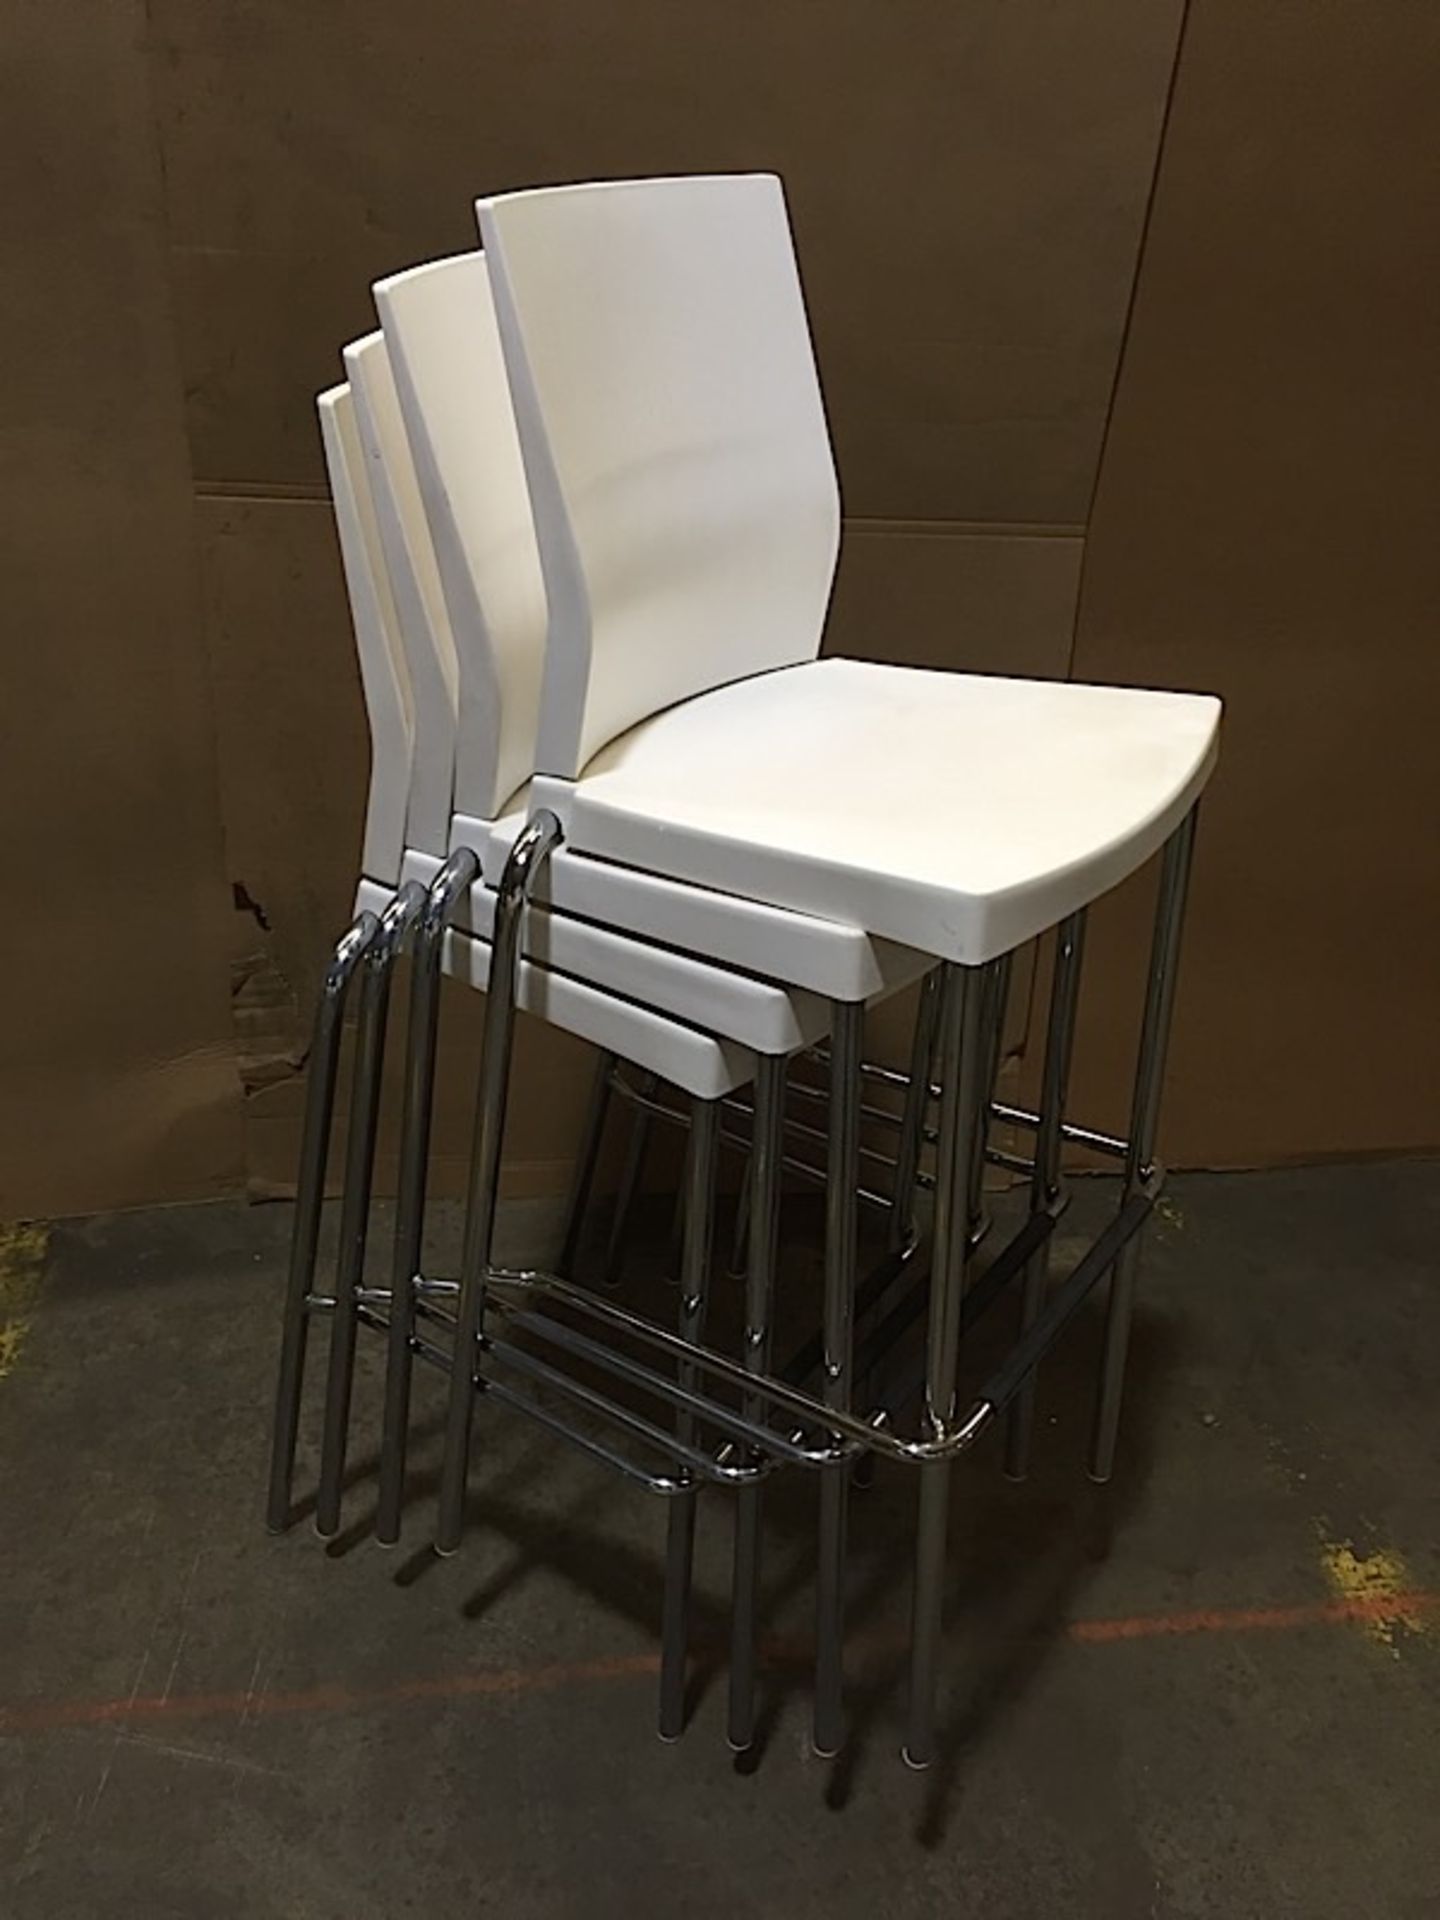 PLASTIC CHAIRS (BIDDING IS PER CHAIR MULTIPLIED BY 4)